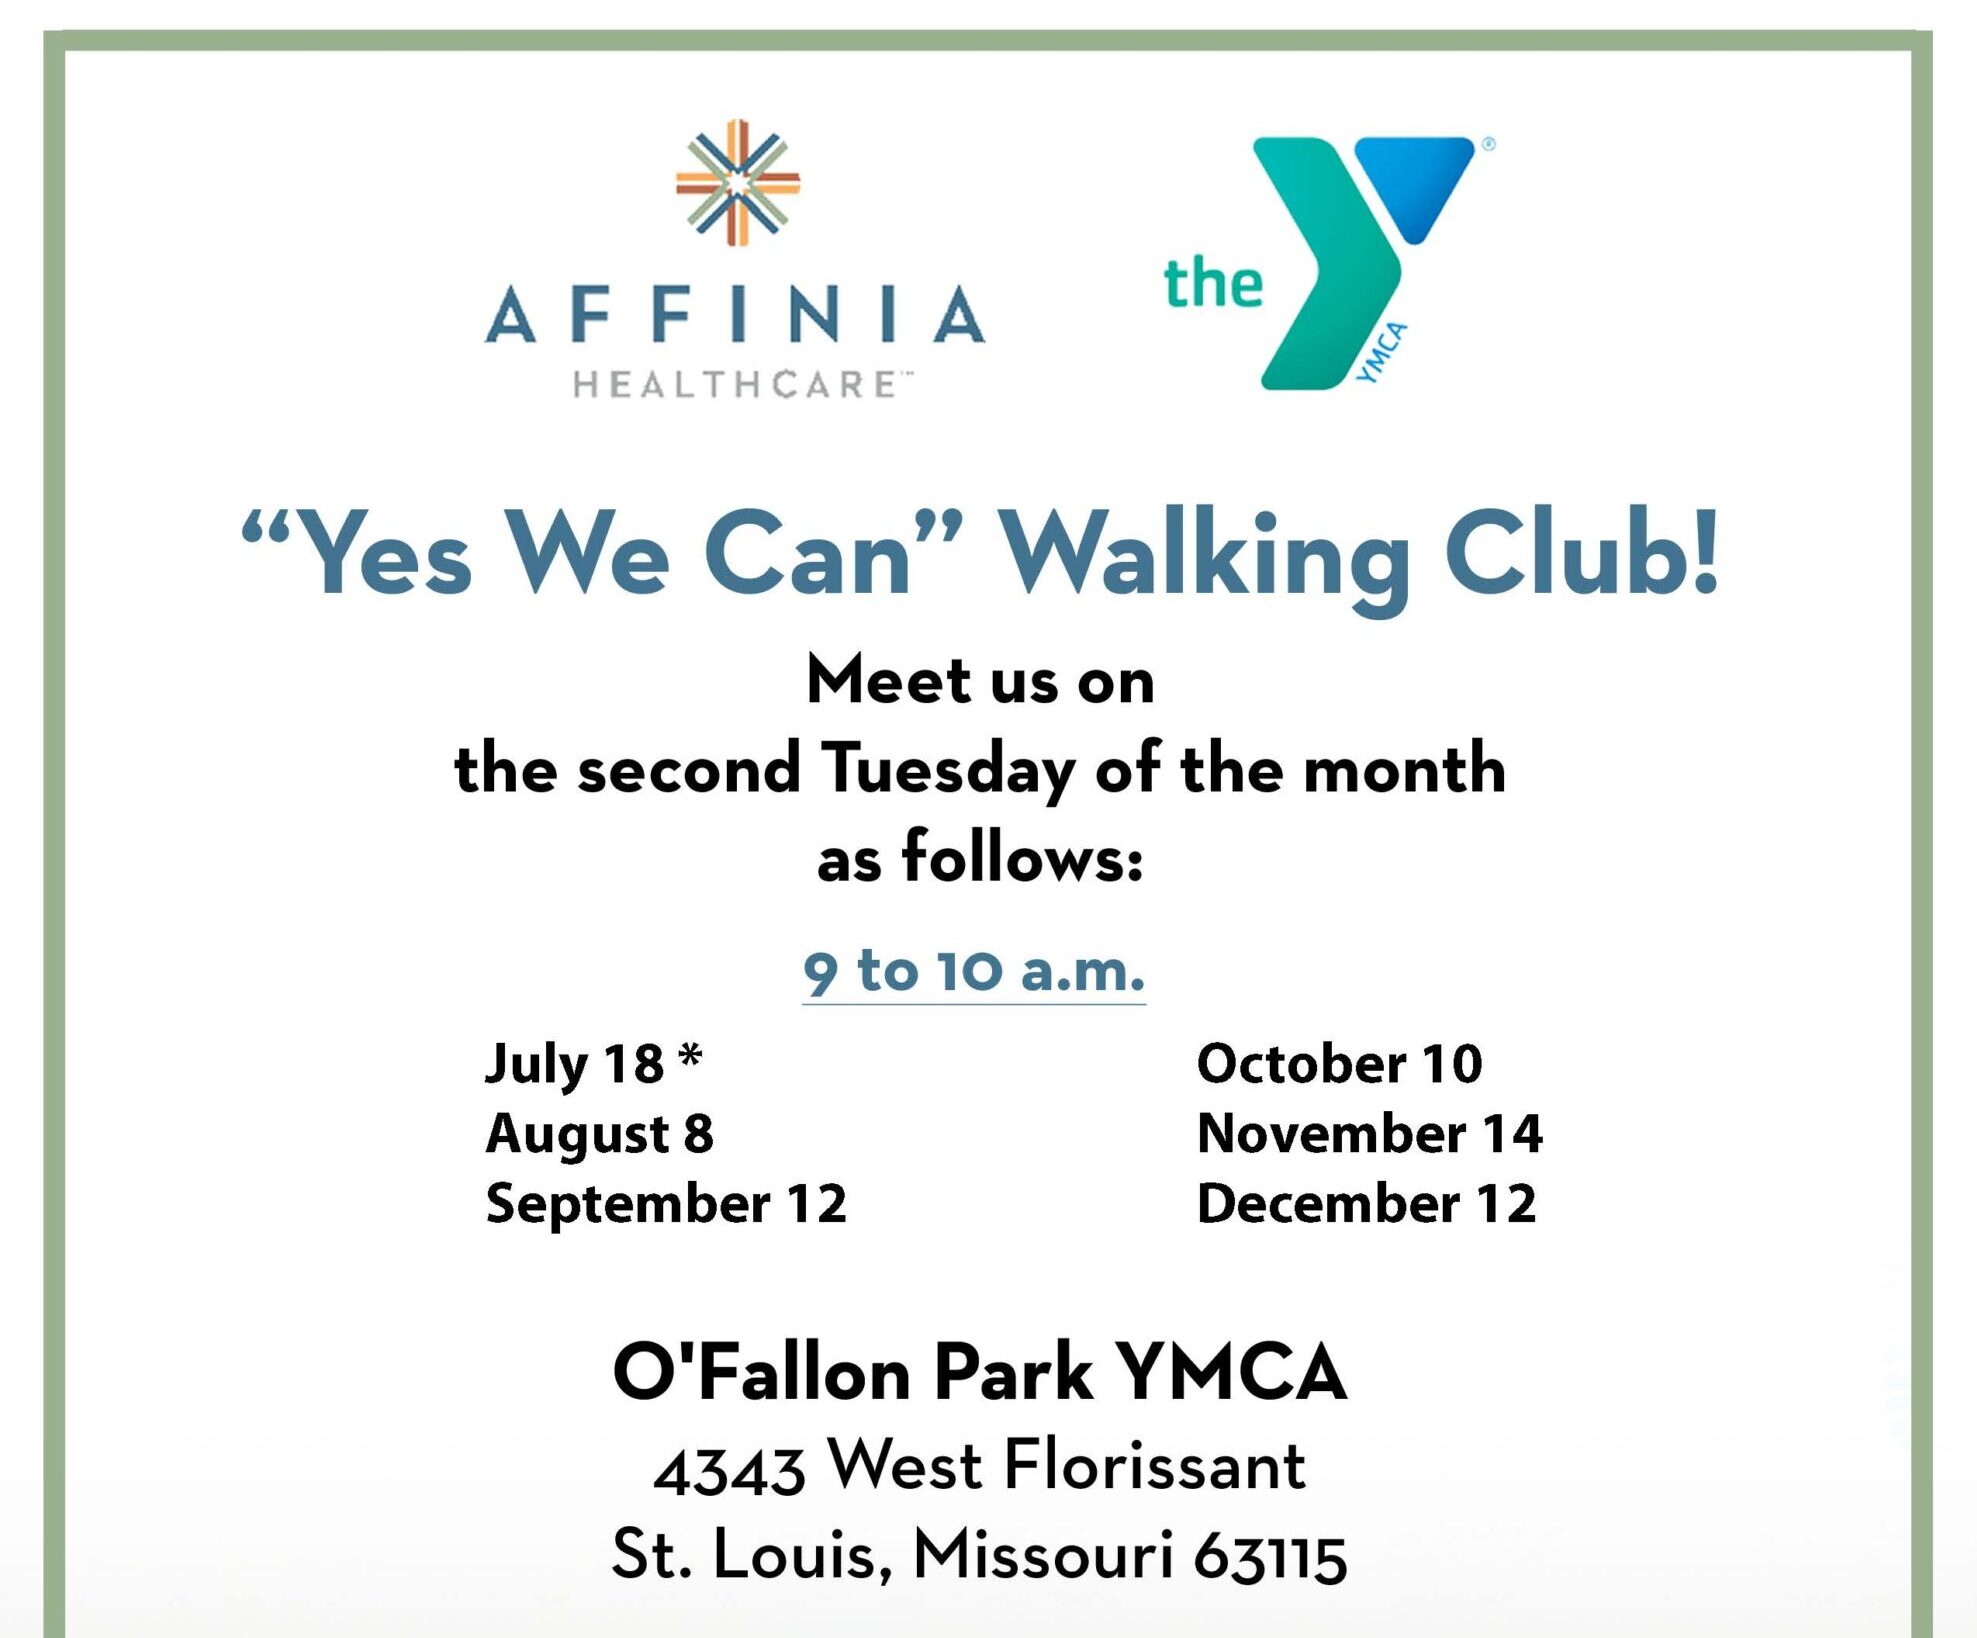 yes we can walking club at ofallon park ymca